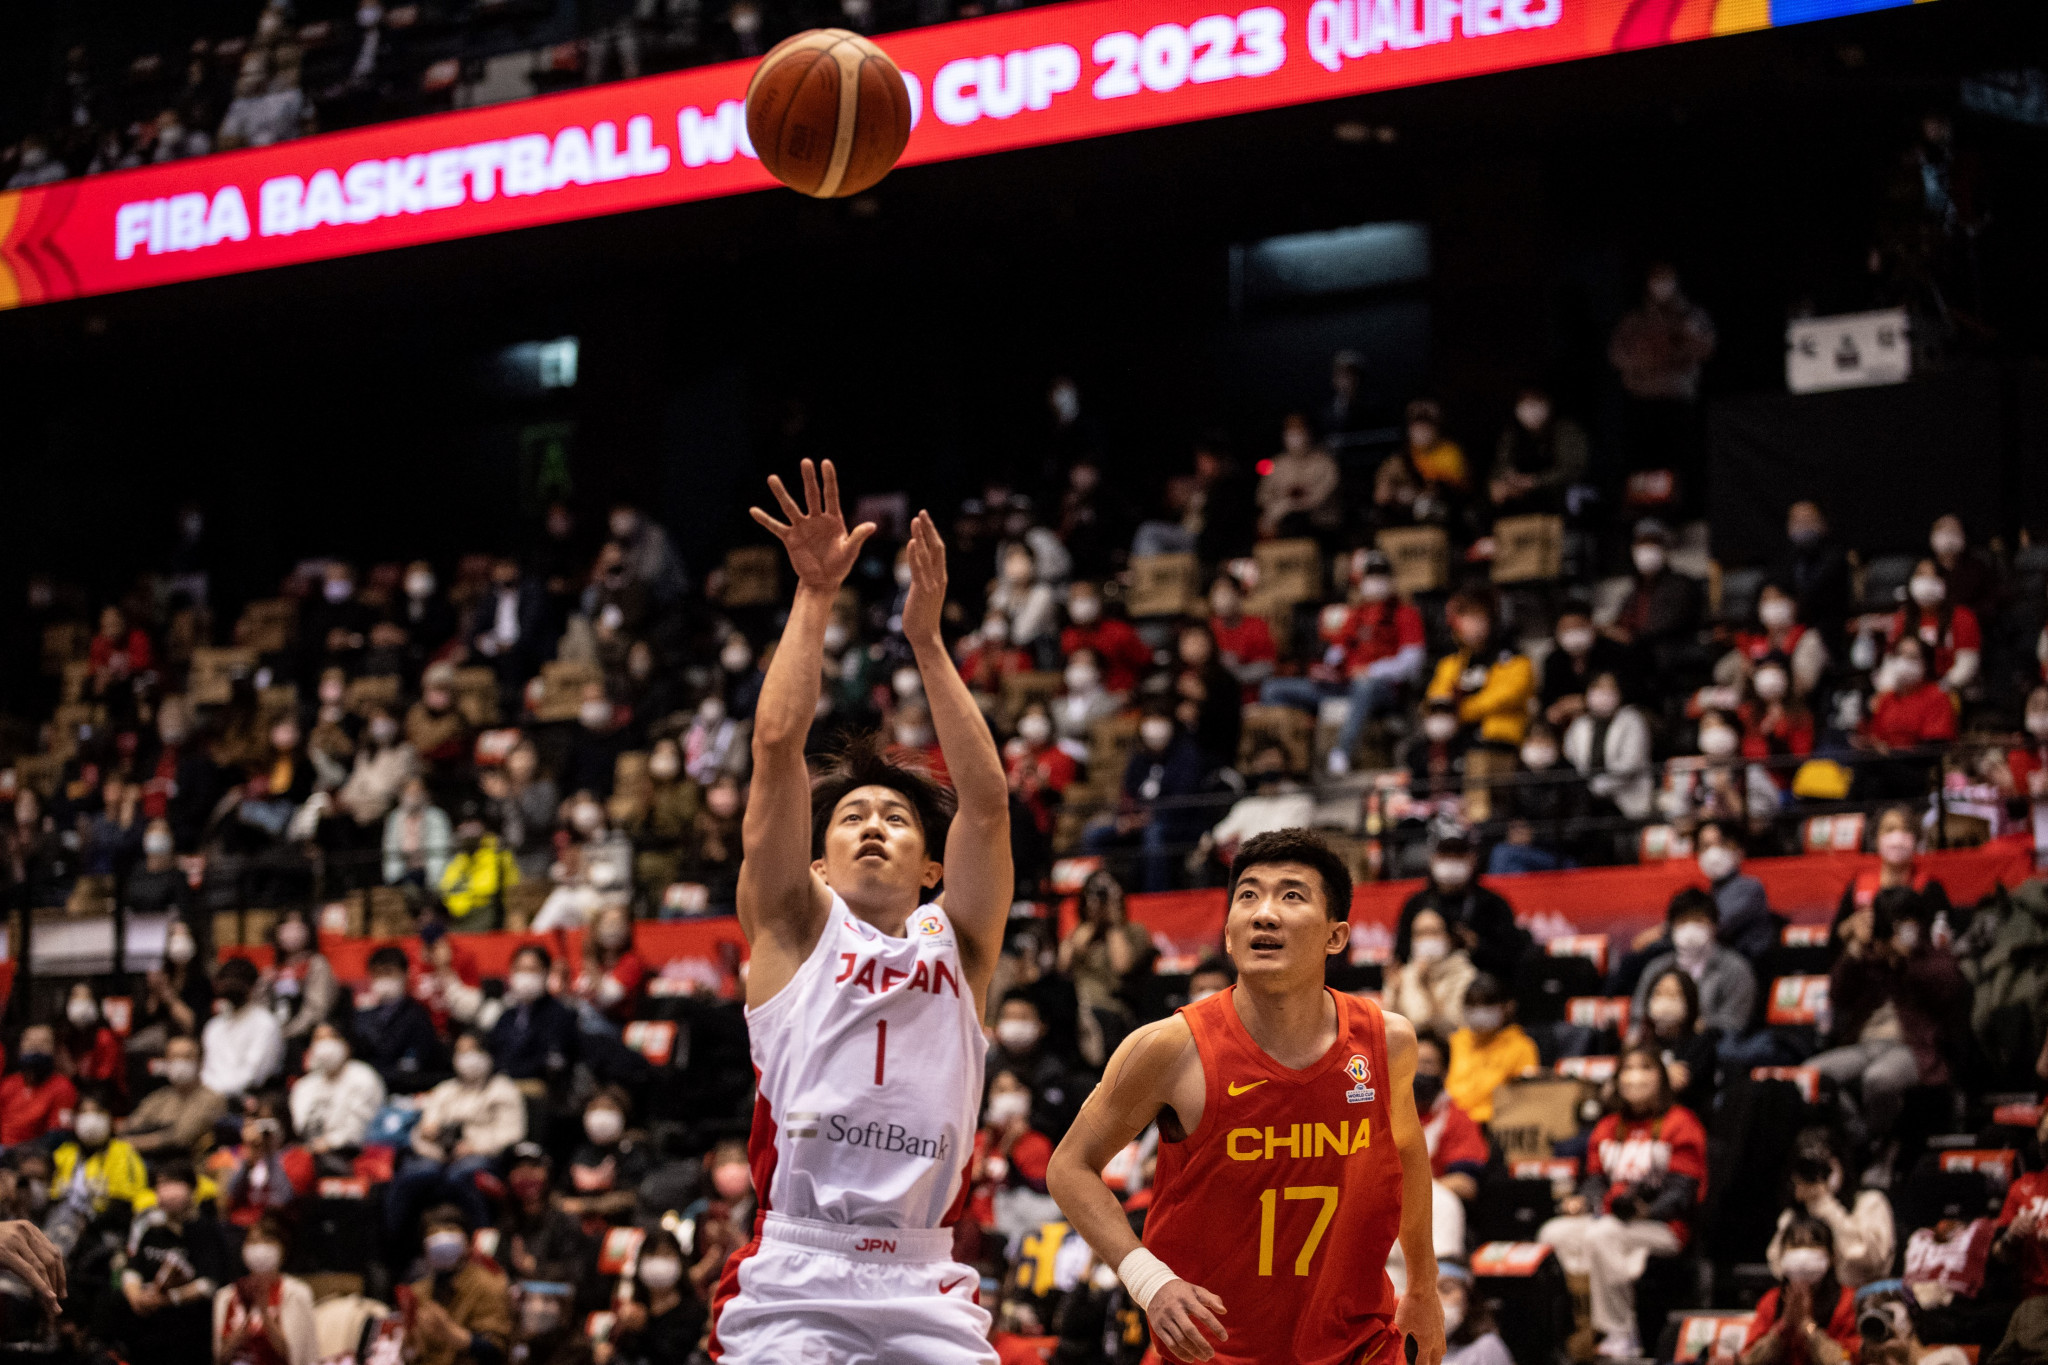 As global master licensee, IMG is set to produce a range of merchandise for the FIBA Basketball World Cup 2023 ©Getty Images